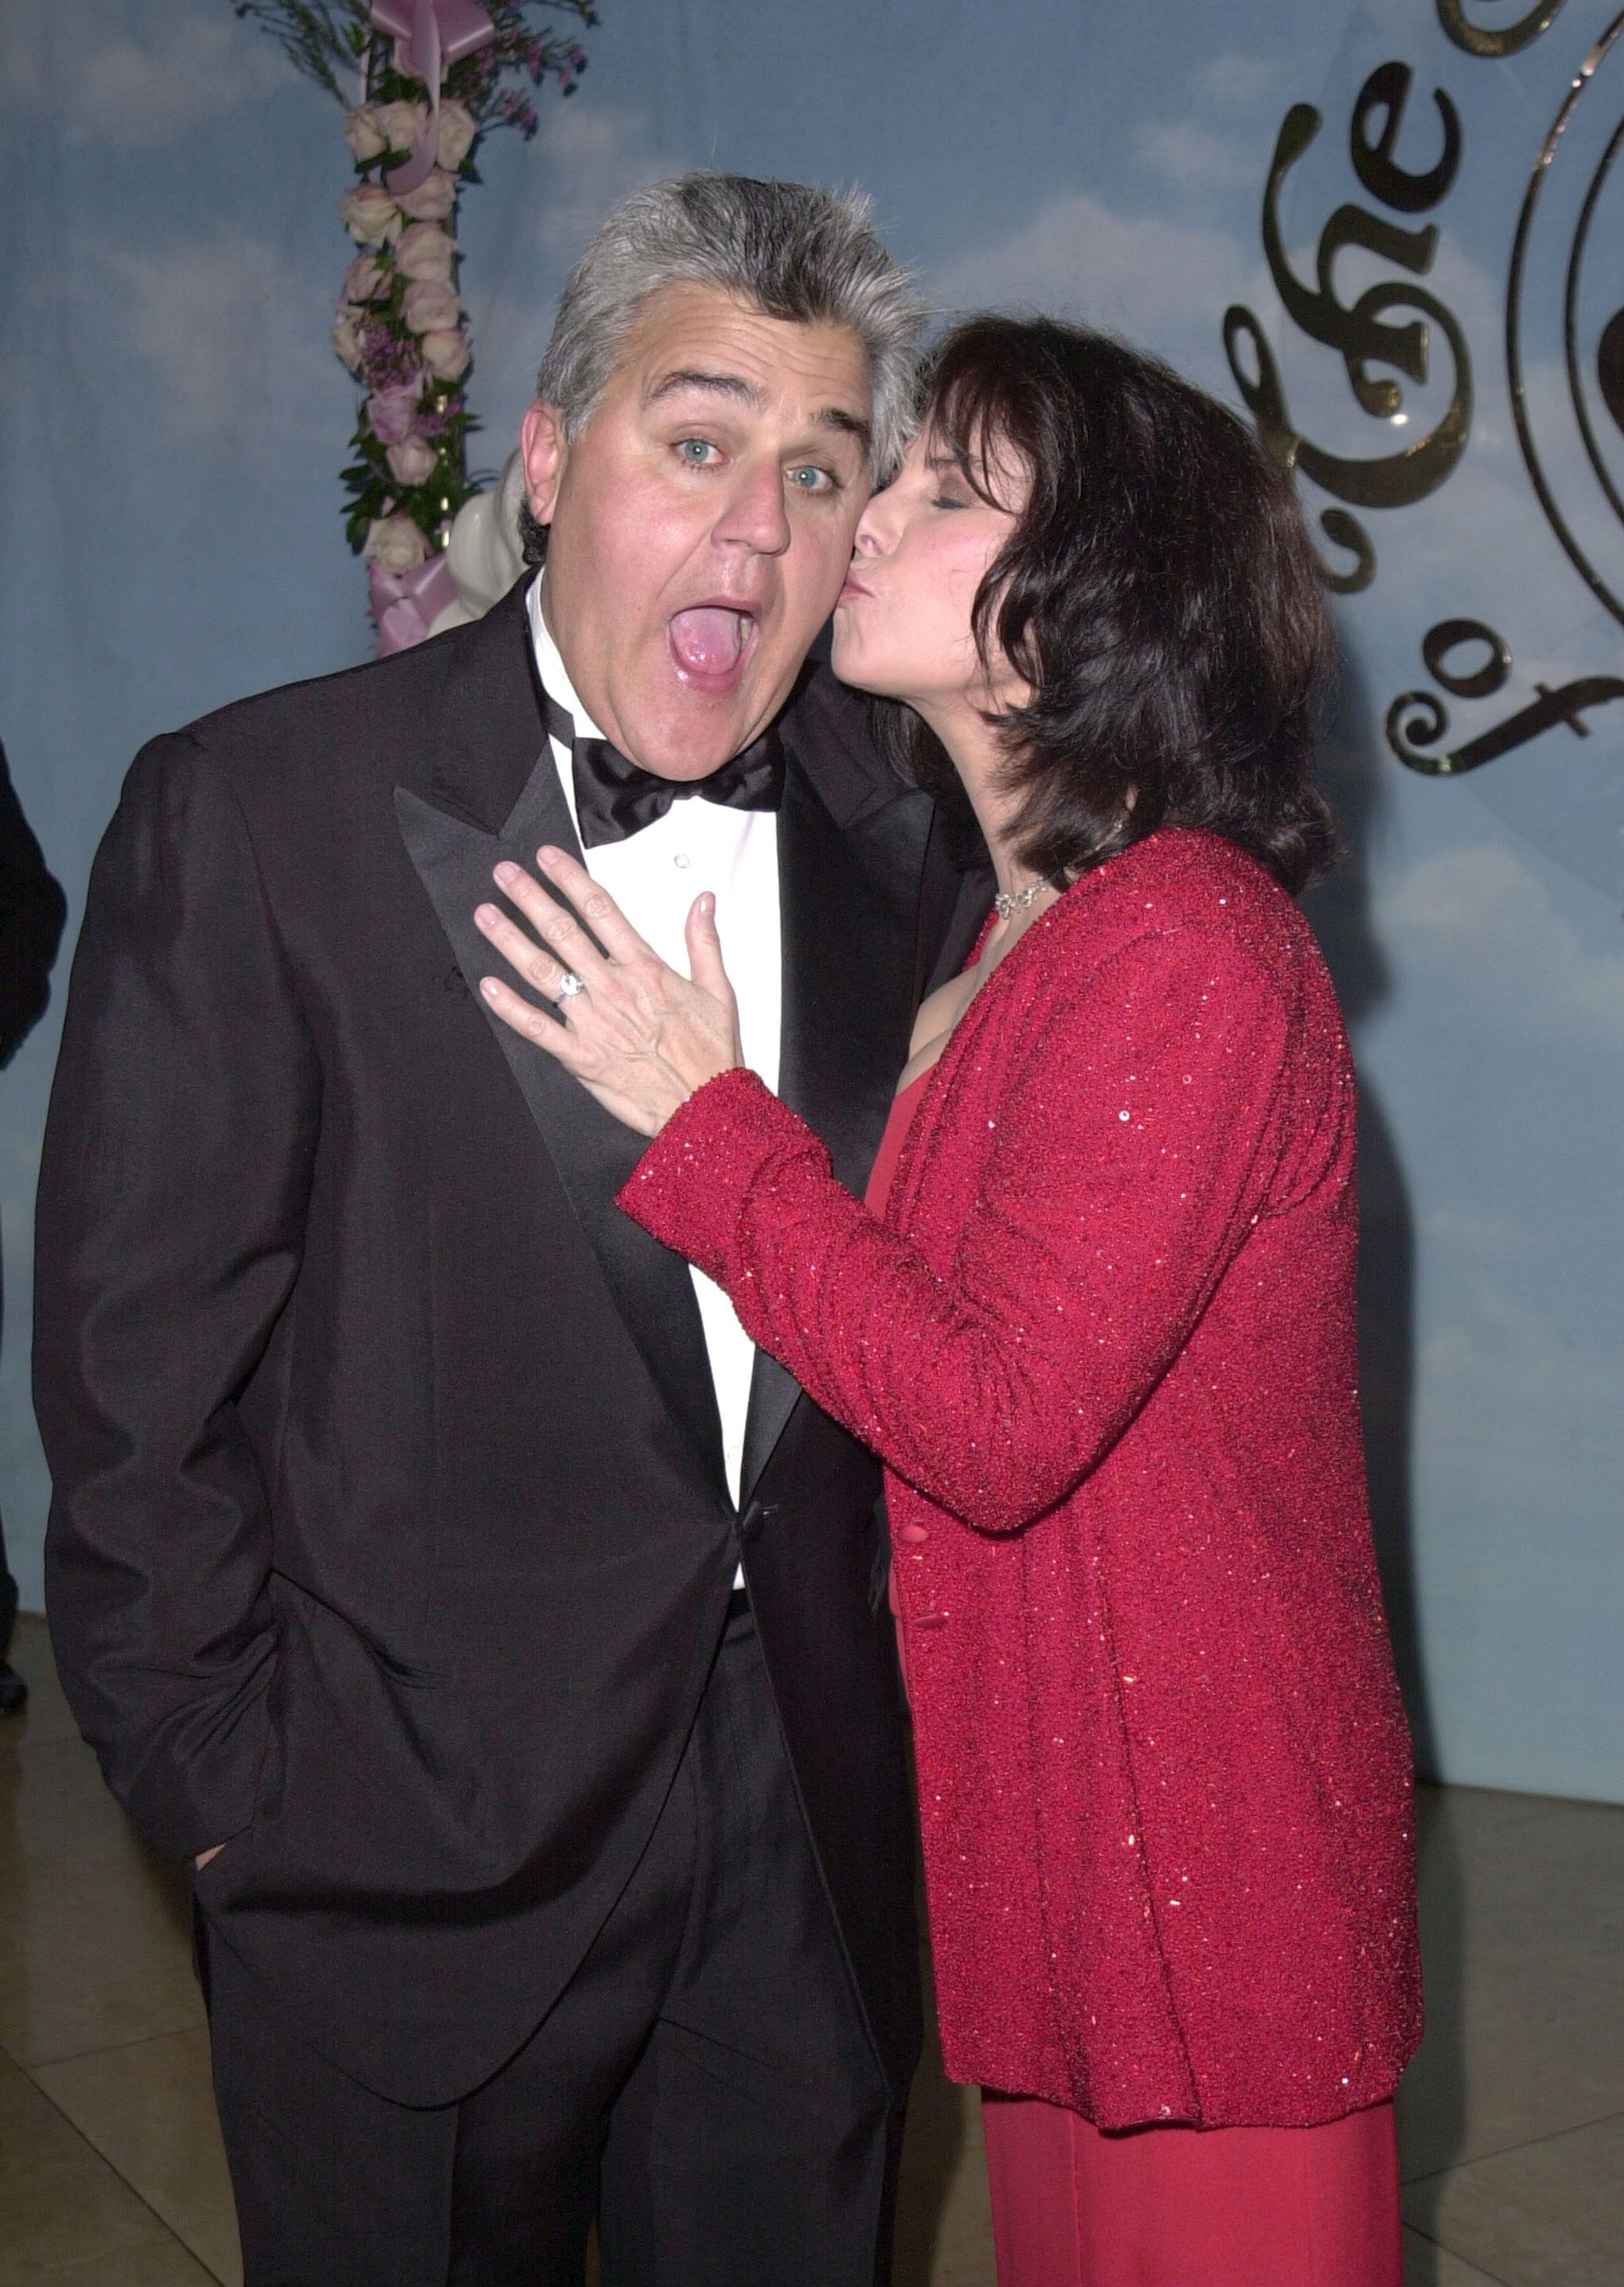 Jay and Mavis Leno during the 14th Carousel of Hope Ball for Barbara Davis Center for Diabetes in Beverly Hills, California, on October 28, 2000. | Source: SGranitz/WireImage/Getty Images